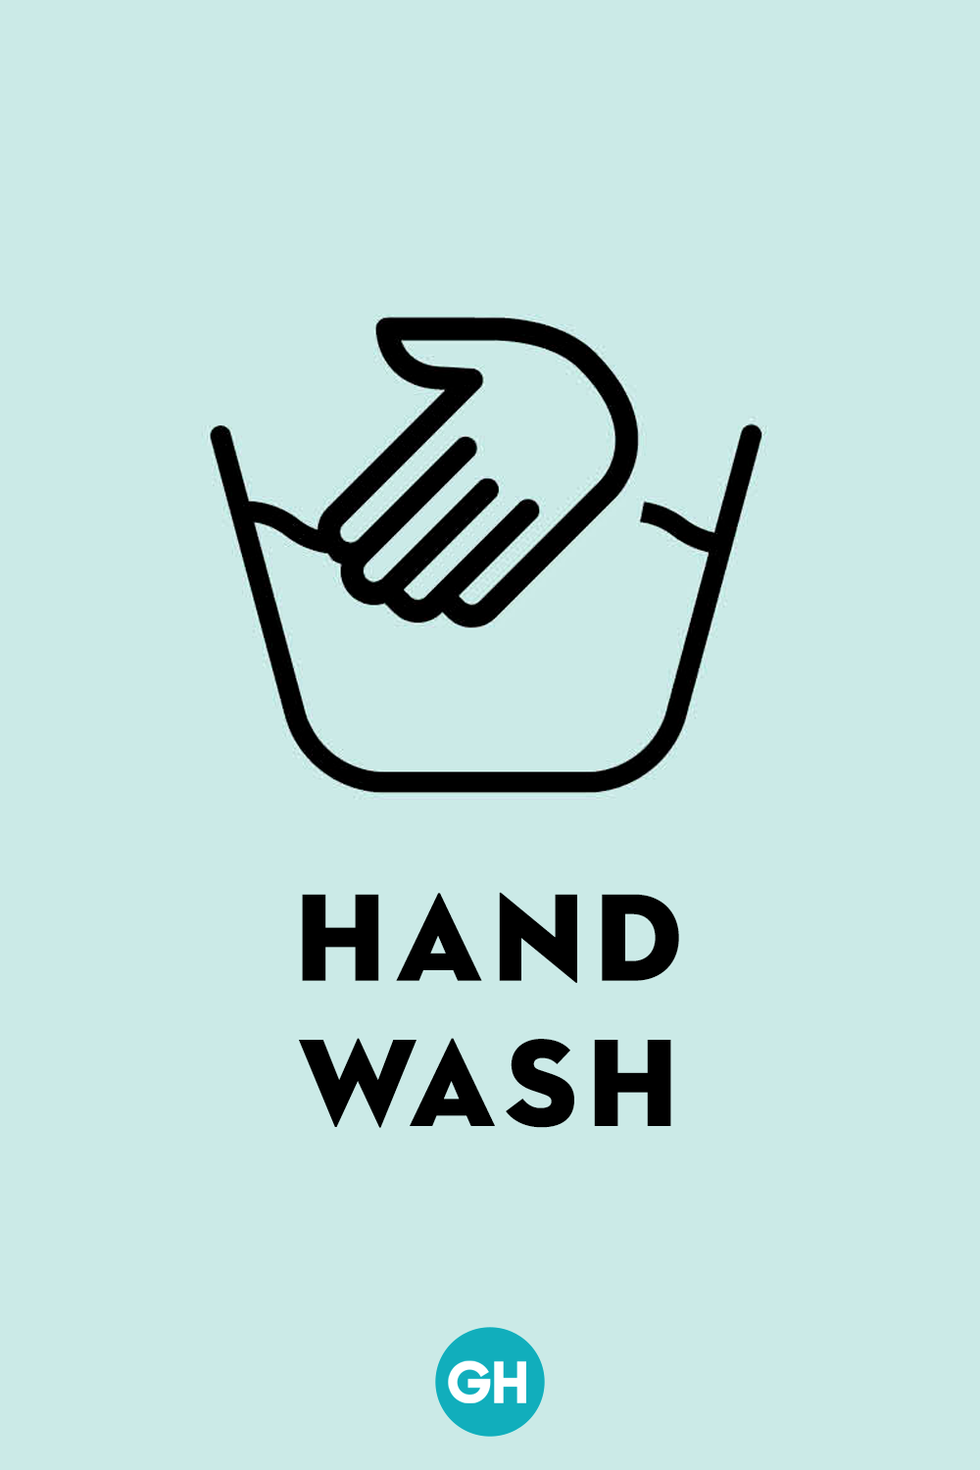 https://hips.hearstapps.com/hmg-prod/images/ghk-guide-to-laundry-symbols-hand-wash-1650032296.png?crop=1xw:1xh;center,top&resize=980:*